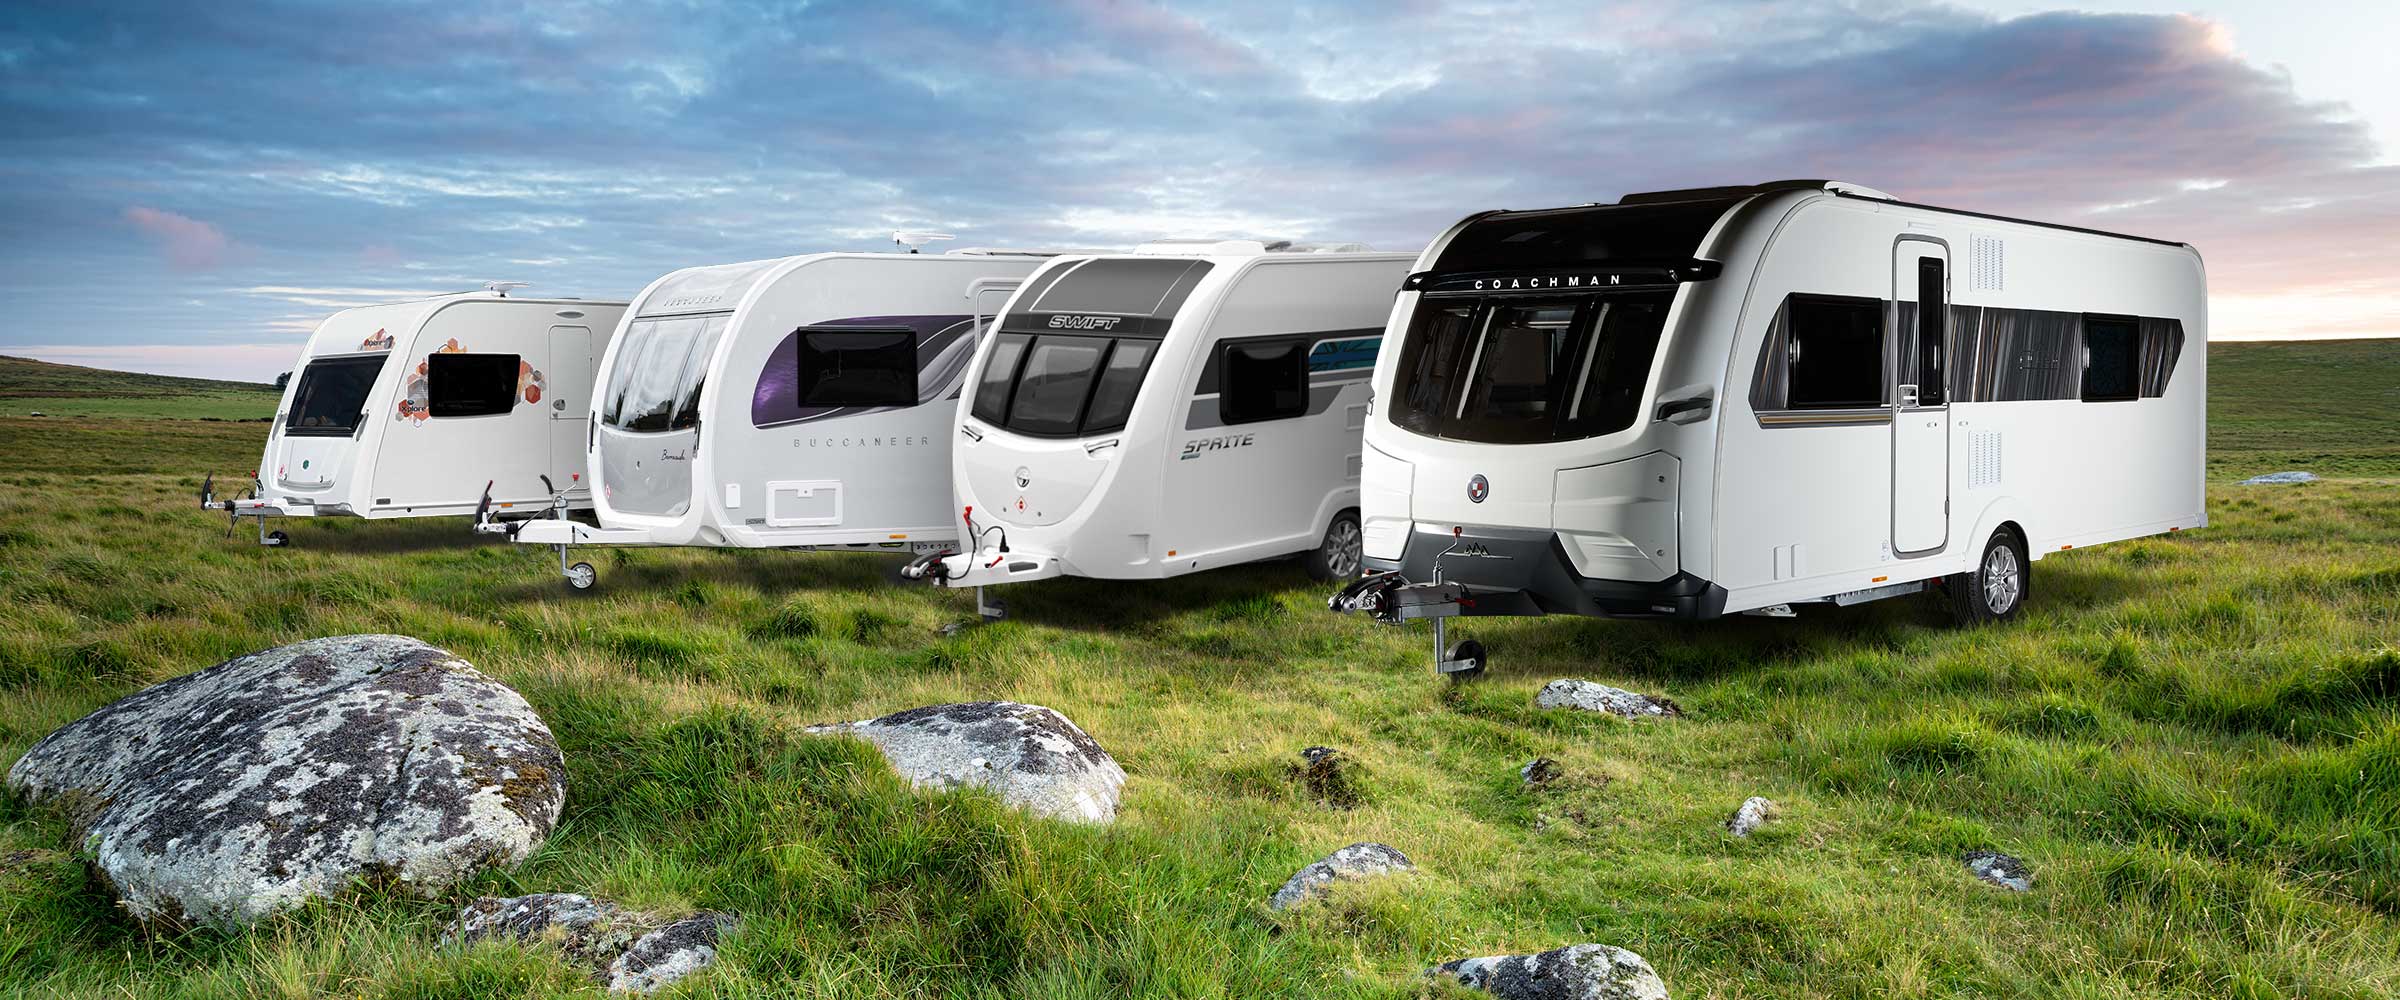 Want to Sell Your Caravan? Here’s How